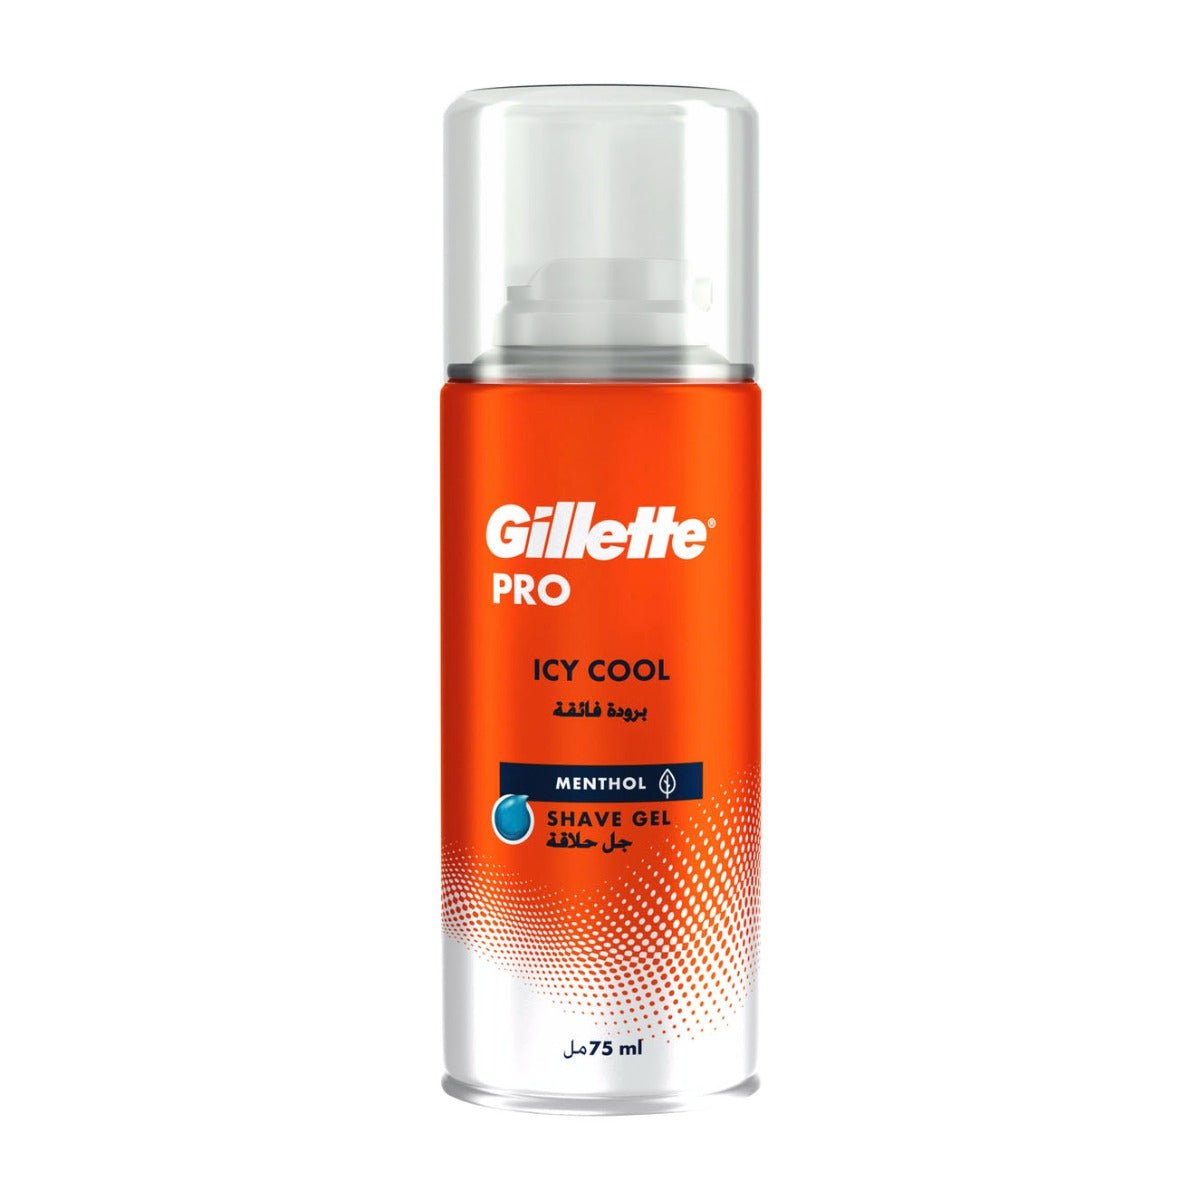 Gillette Pro Icy Cool Menthol Shave Gel - Bloom Pharmacy